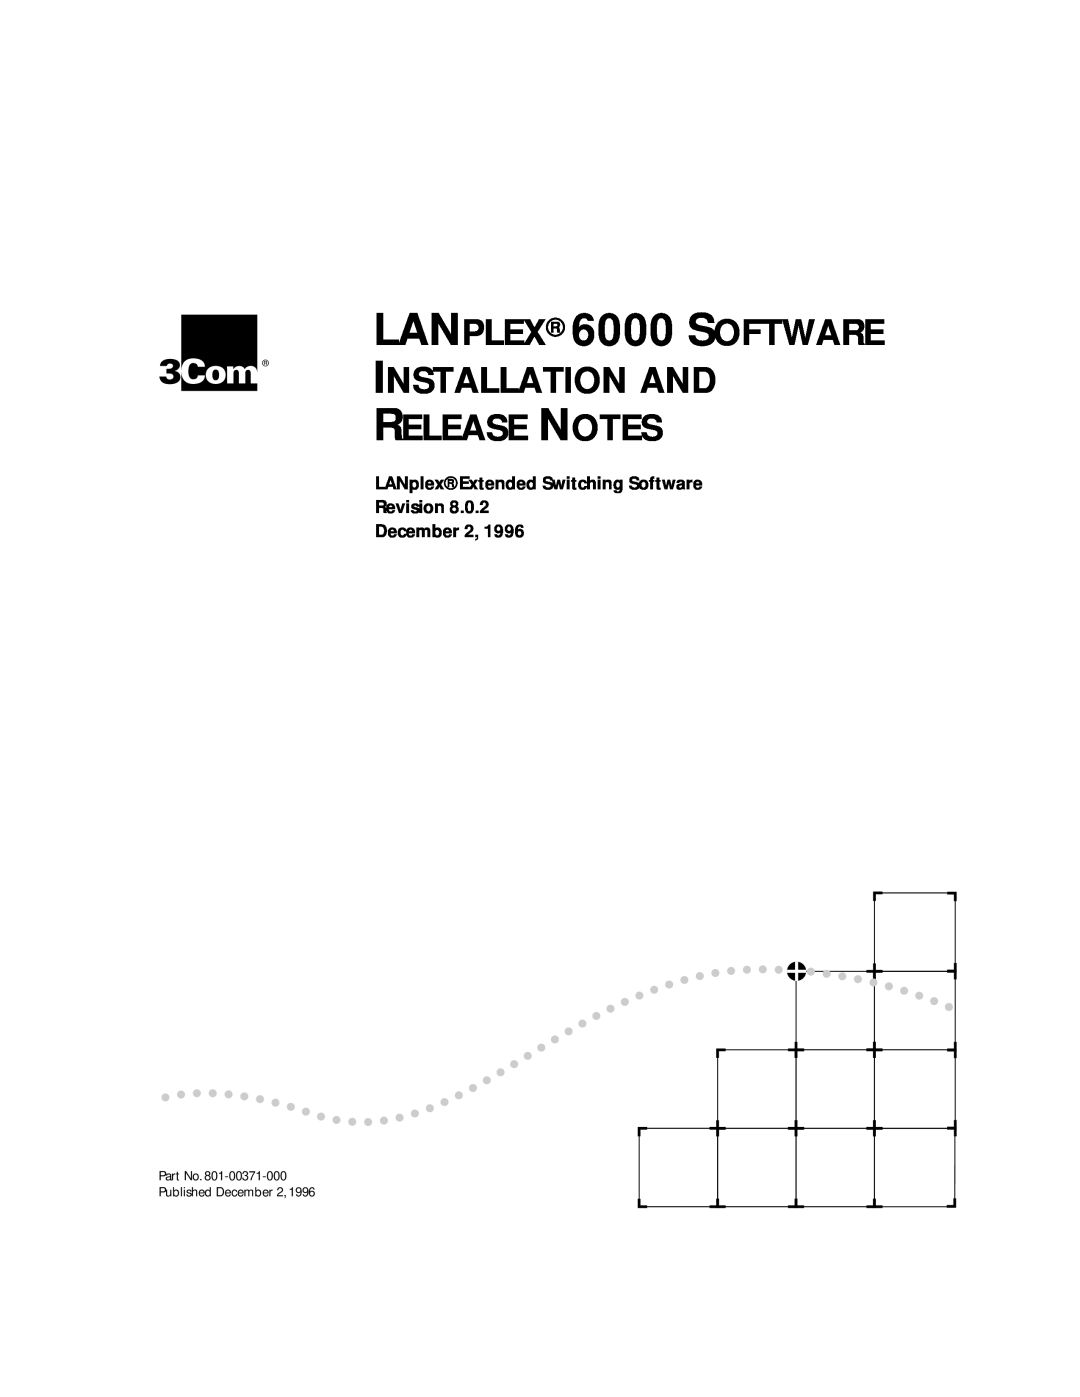 3Com manual LANPLEX 6000 SOFTWARE, Installation And Release Notes, LANplex Extended Switching Software Revision 